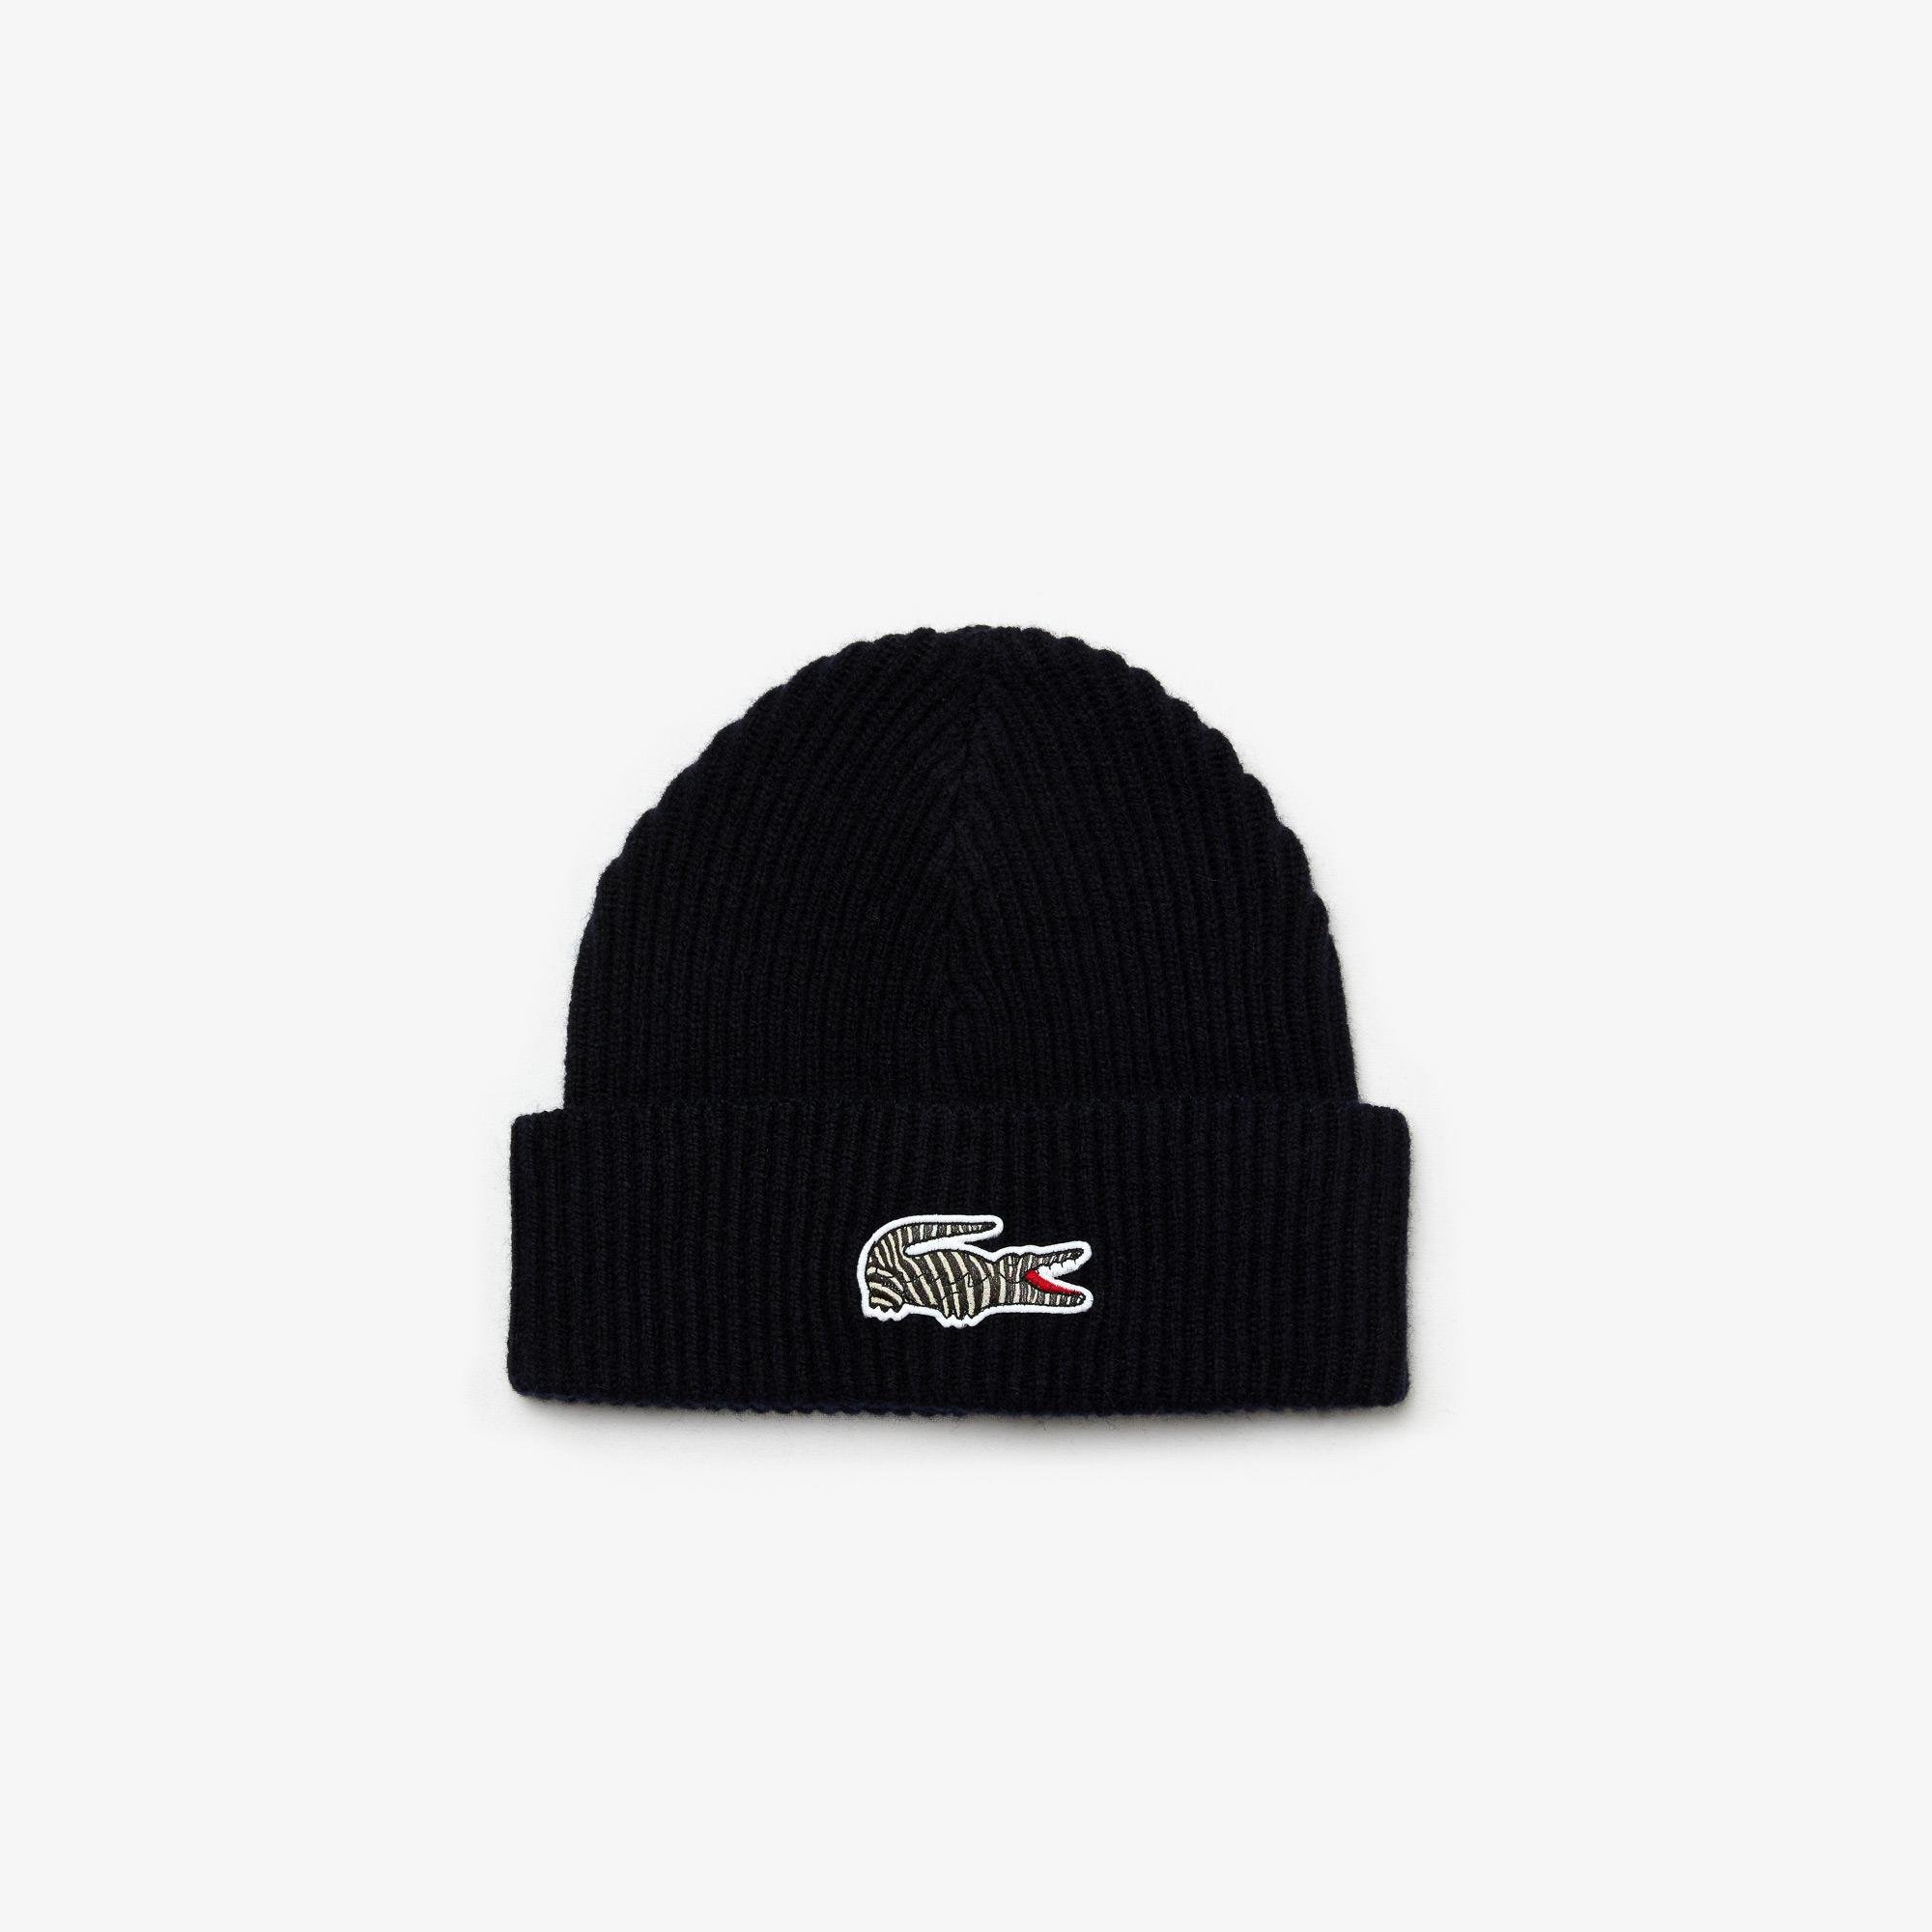 Lacoste x National Geographic Men’s Ribbed Wool Beanie